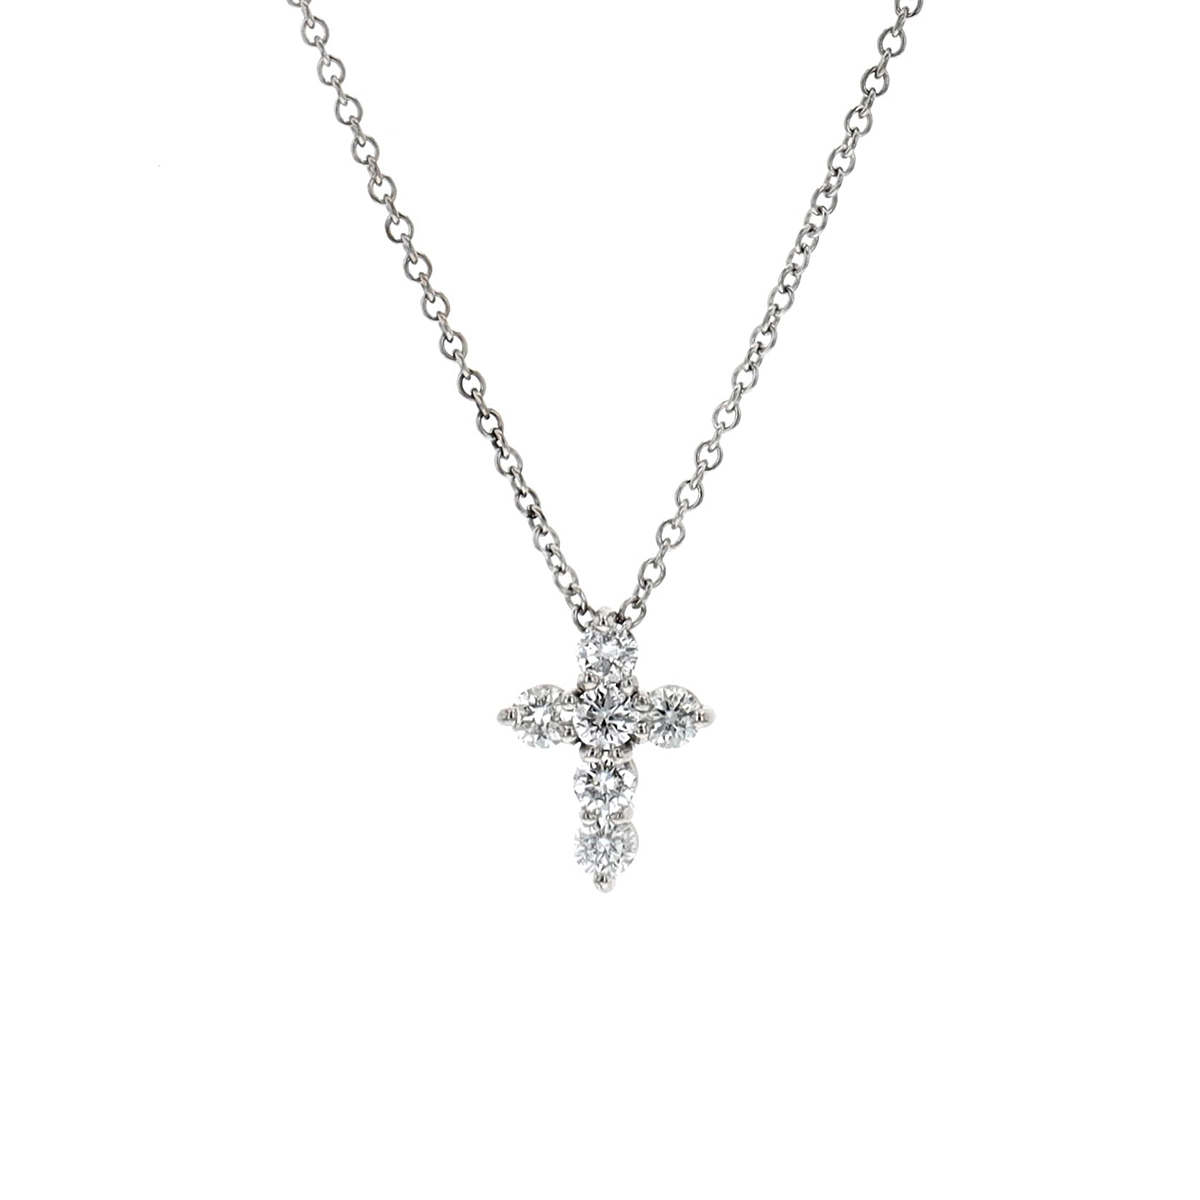 14K White Gold Cross Pendant and Chain